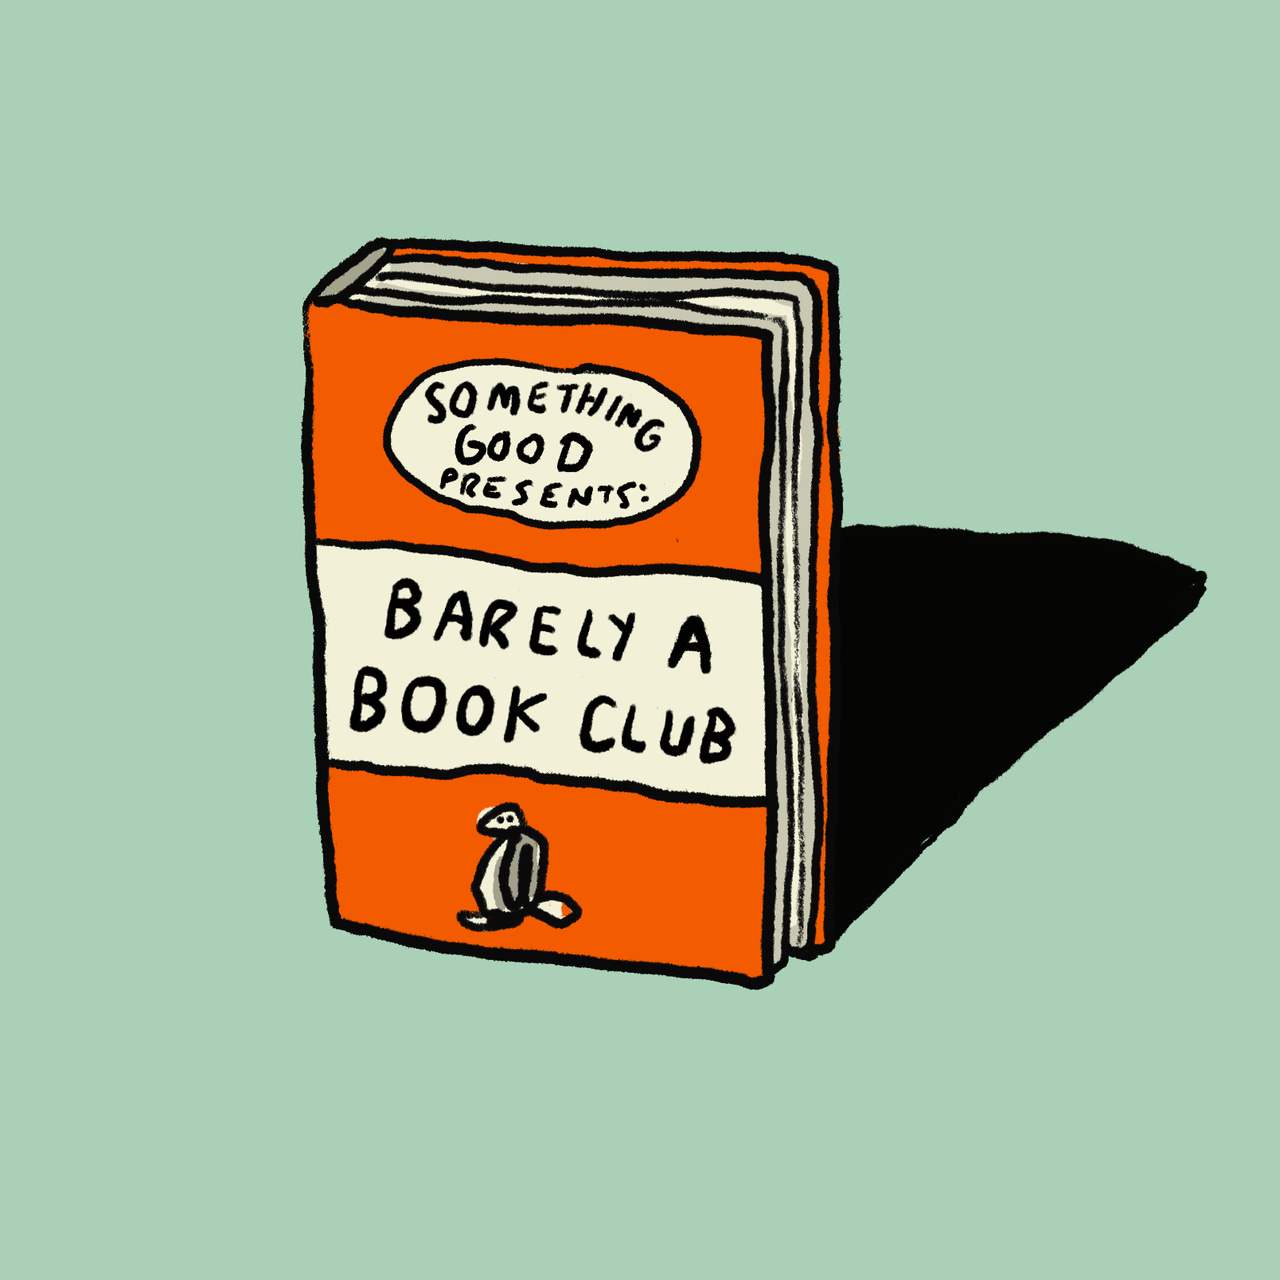 Something Good: Barely a Book Club